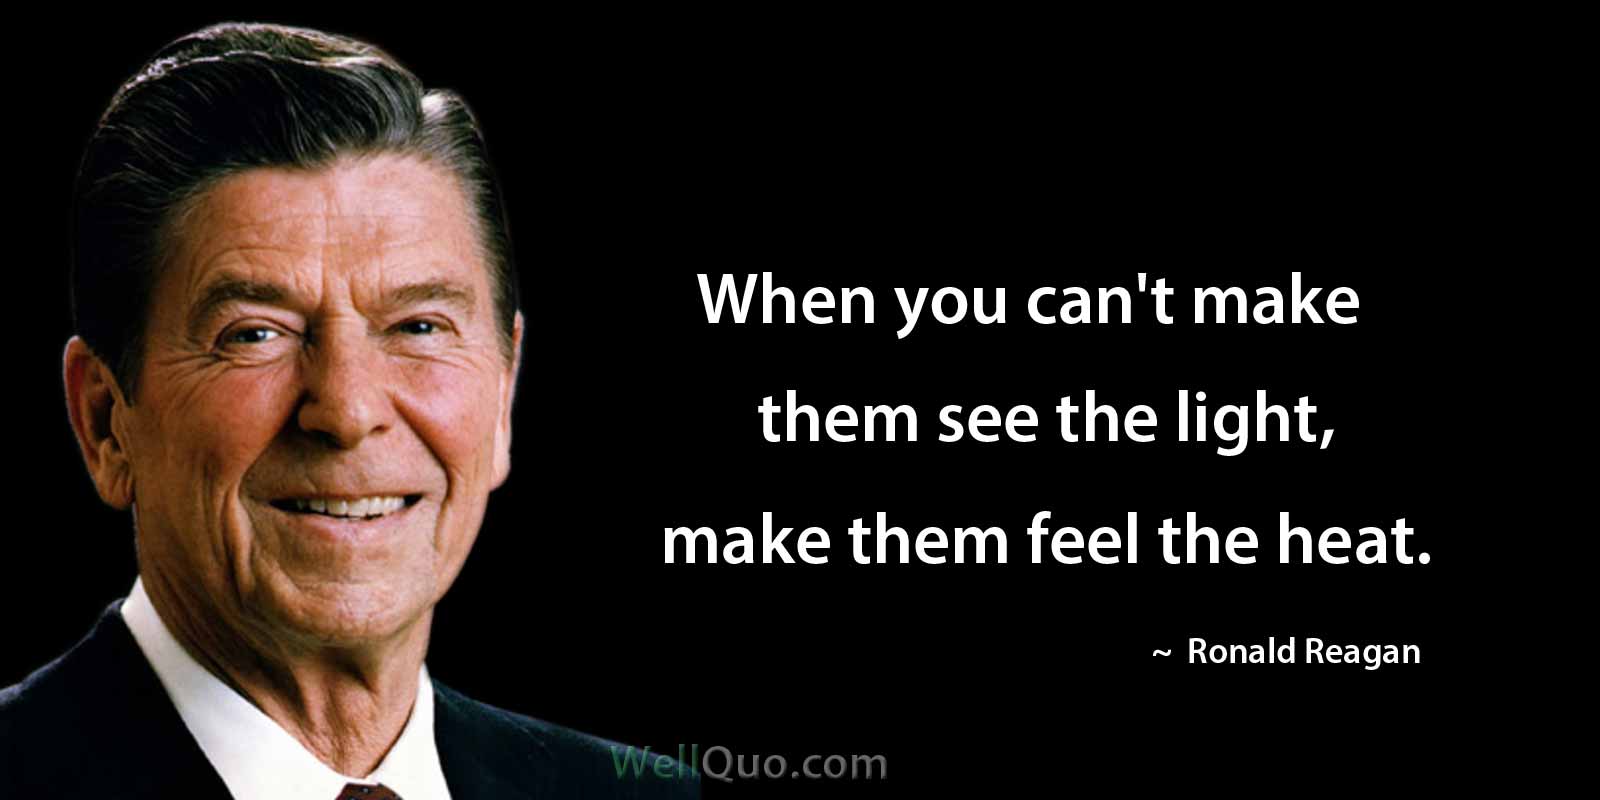 Ronald Reagan Quotes on Freedom and Government - Well Quo